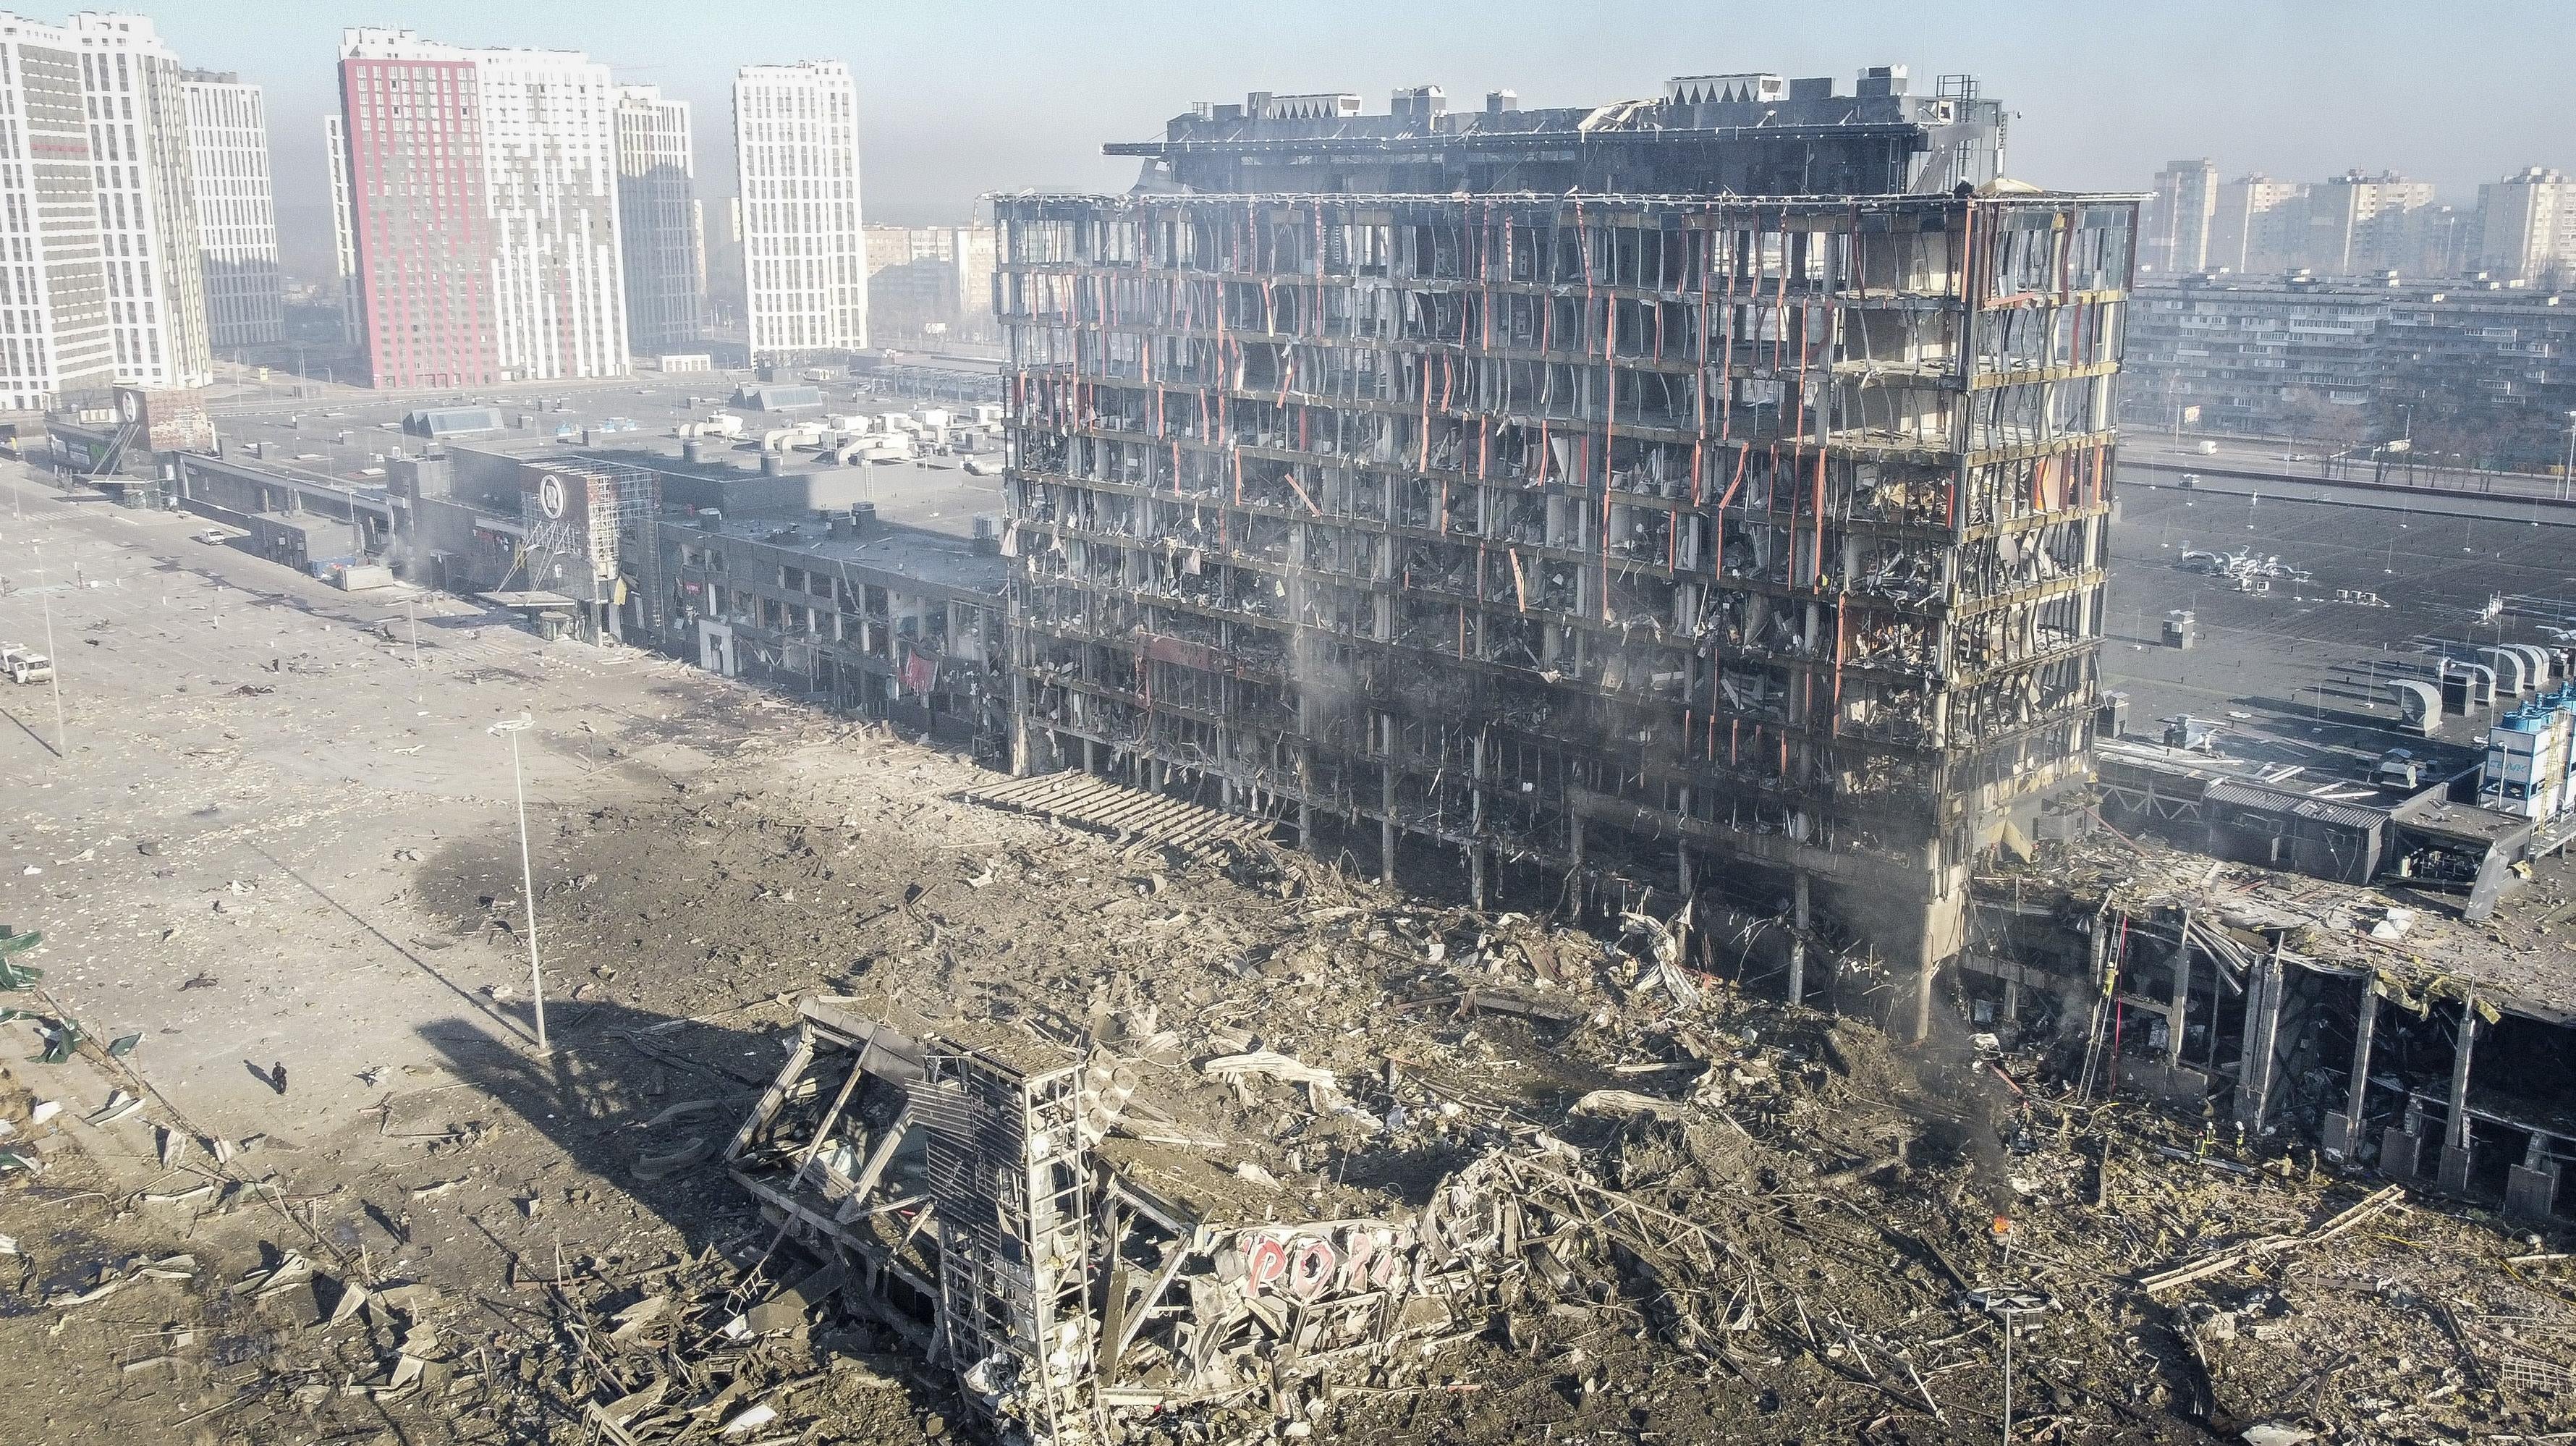 An aerial view of a completely destroyed shopping mall after a Russian shelling in Kyiv, Ukraine on March 21, 2022. (Photo: Emin Sansar/Anadolu Agency, Getty Images)